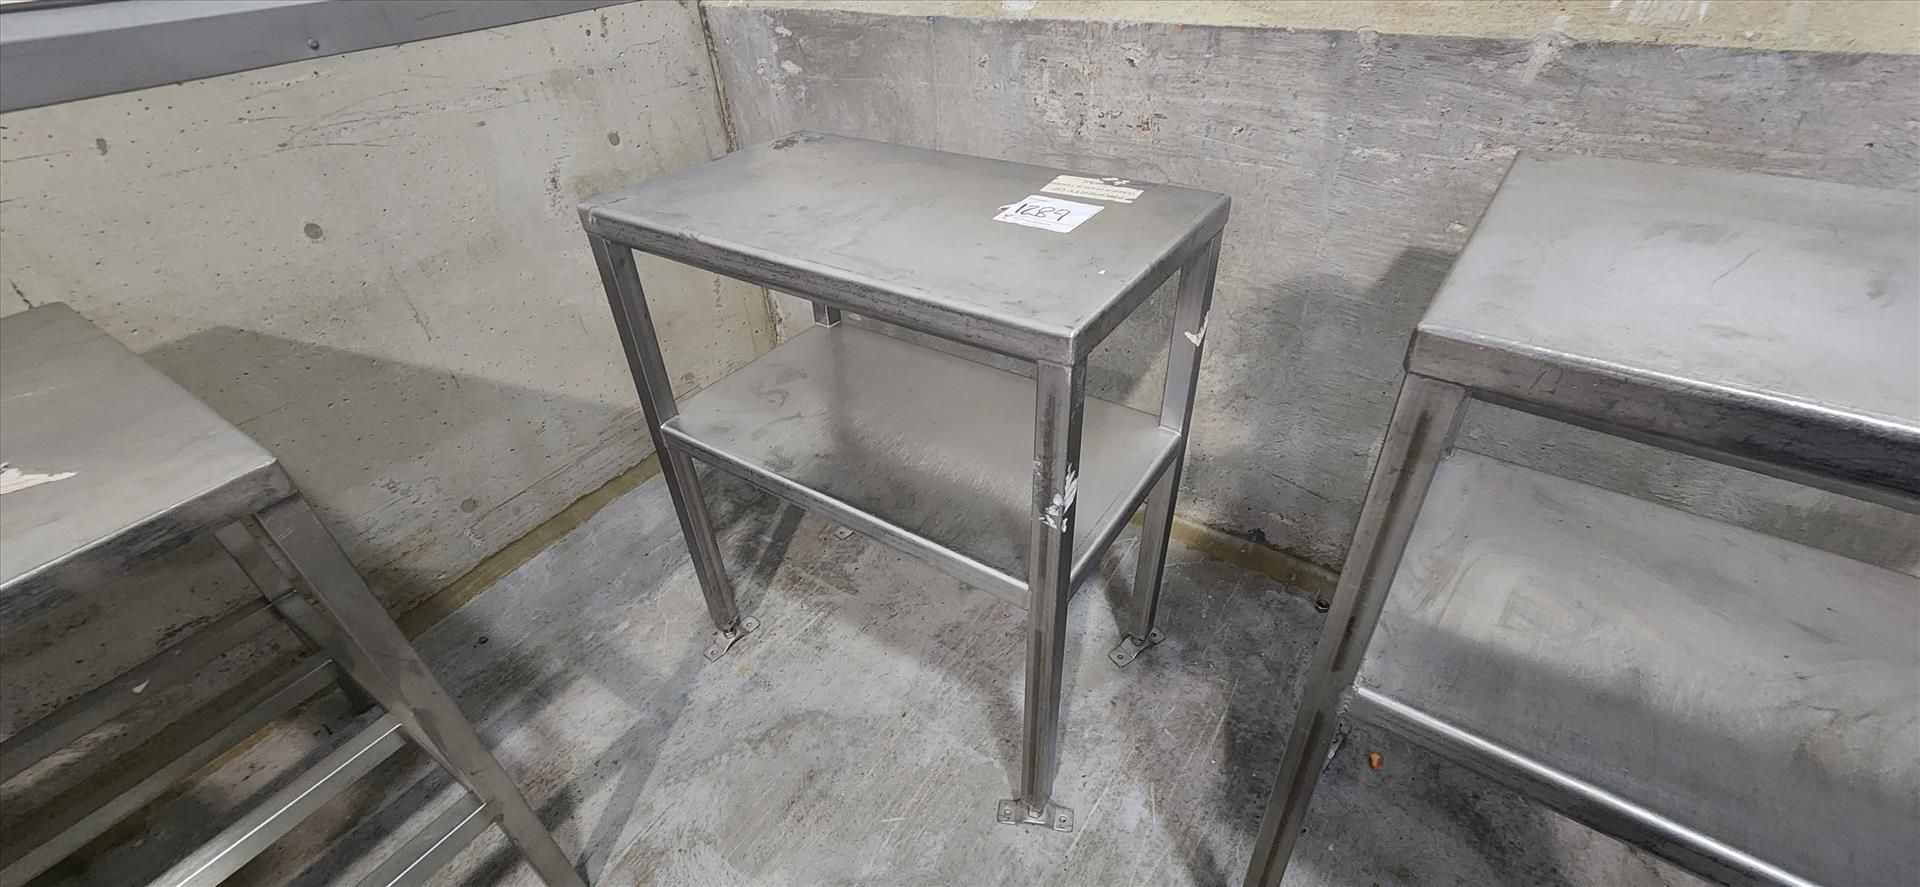 table, stainless steel, approx. 18 in. x 30 in. [TAG 1289 - LOC Brockley Dr.]